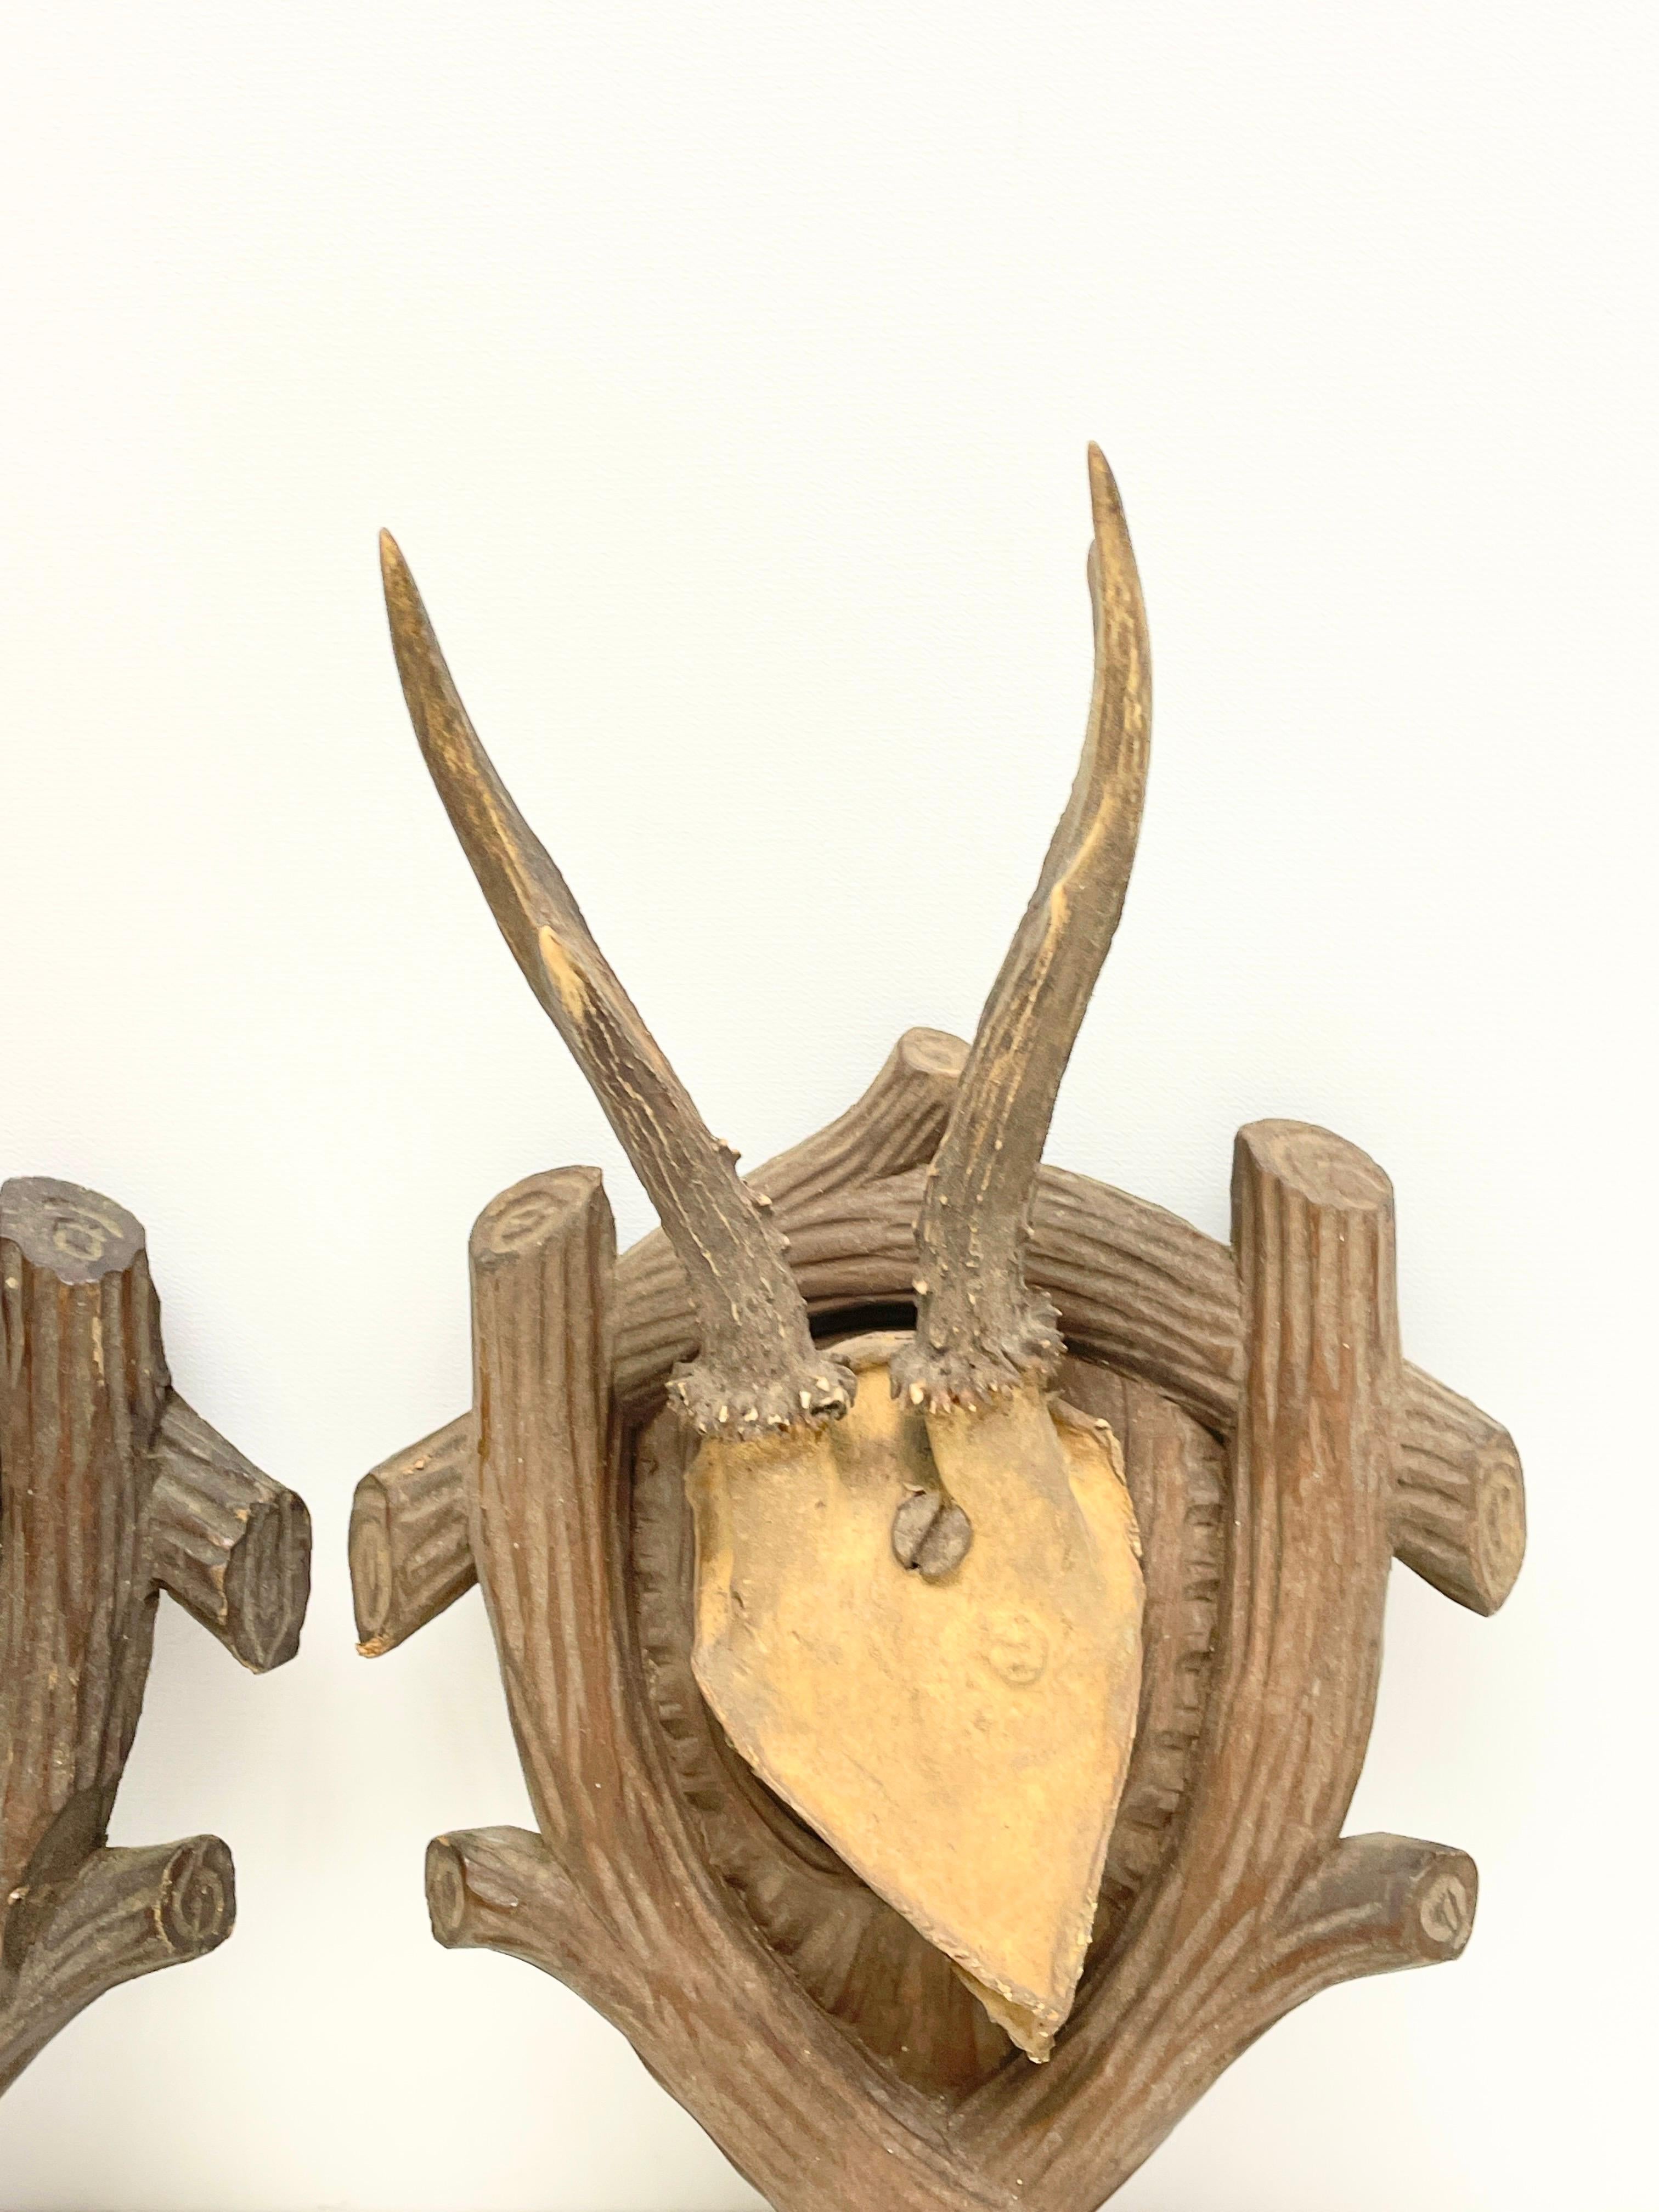 Late 19th Century Two Deer Antler Mount Trophy on Black Forest Carved Wood Plaque from Austria